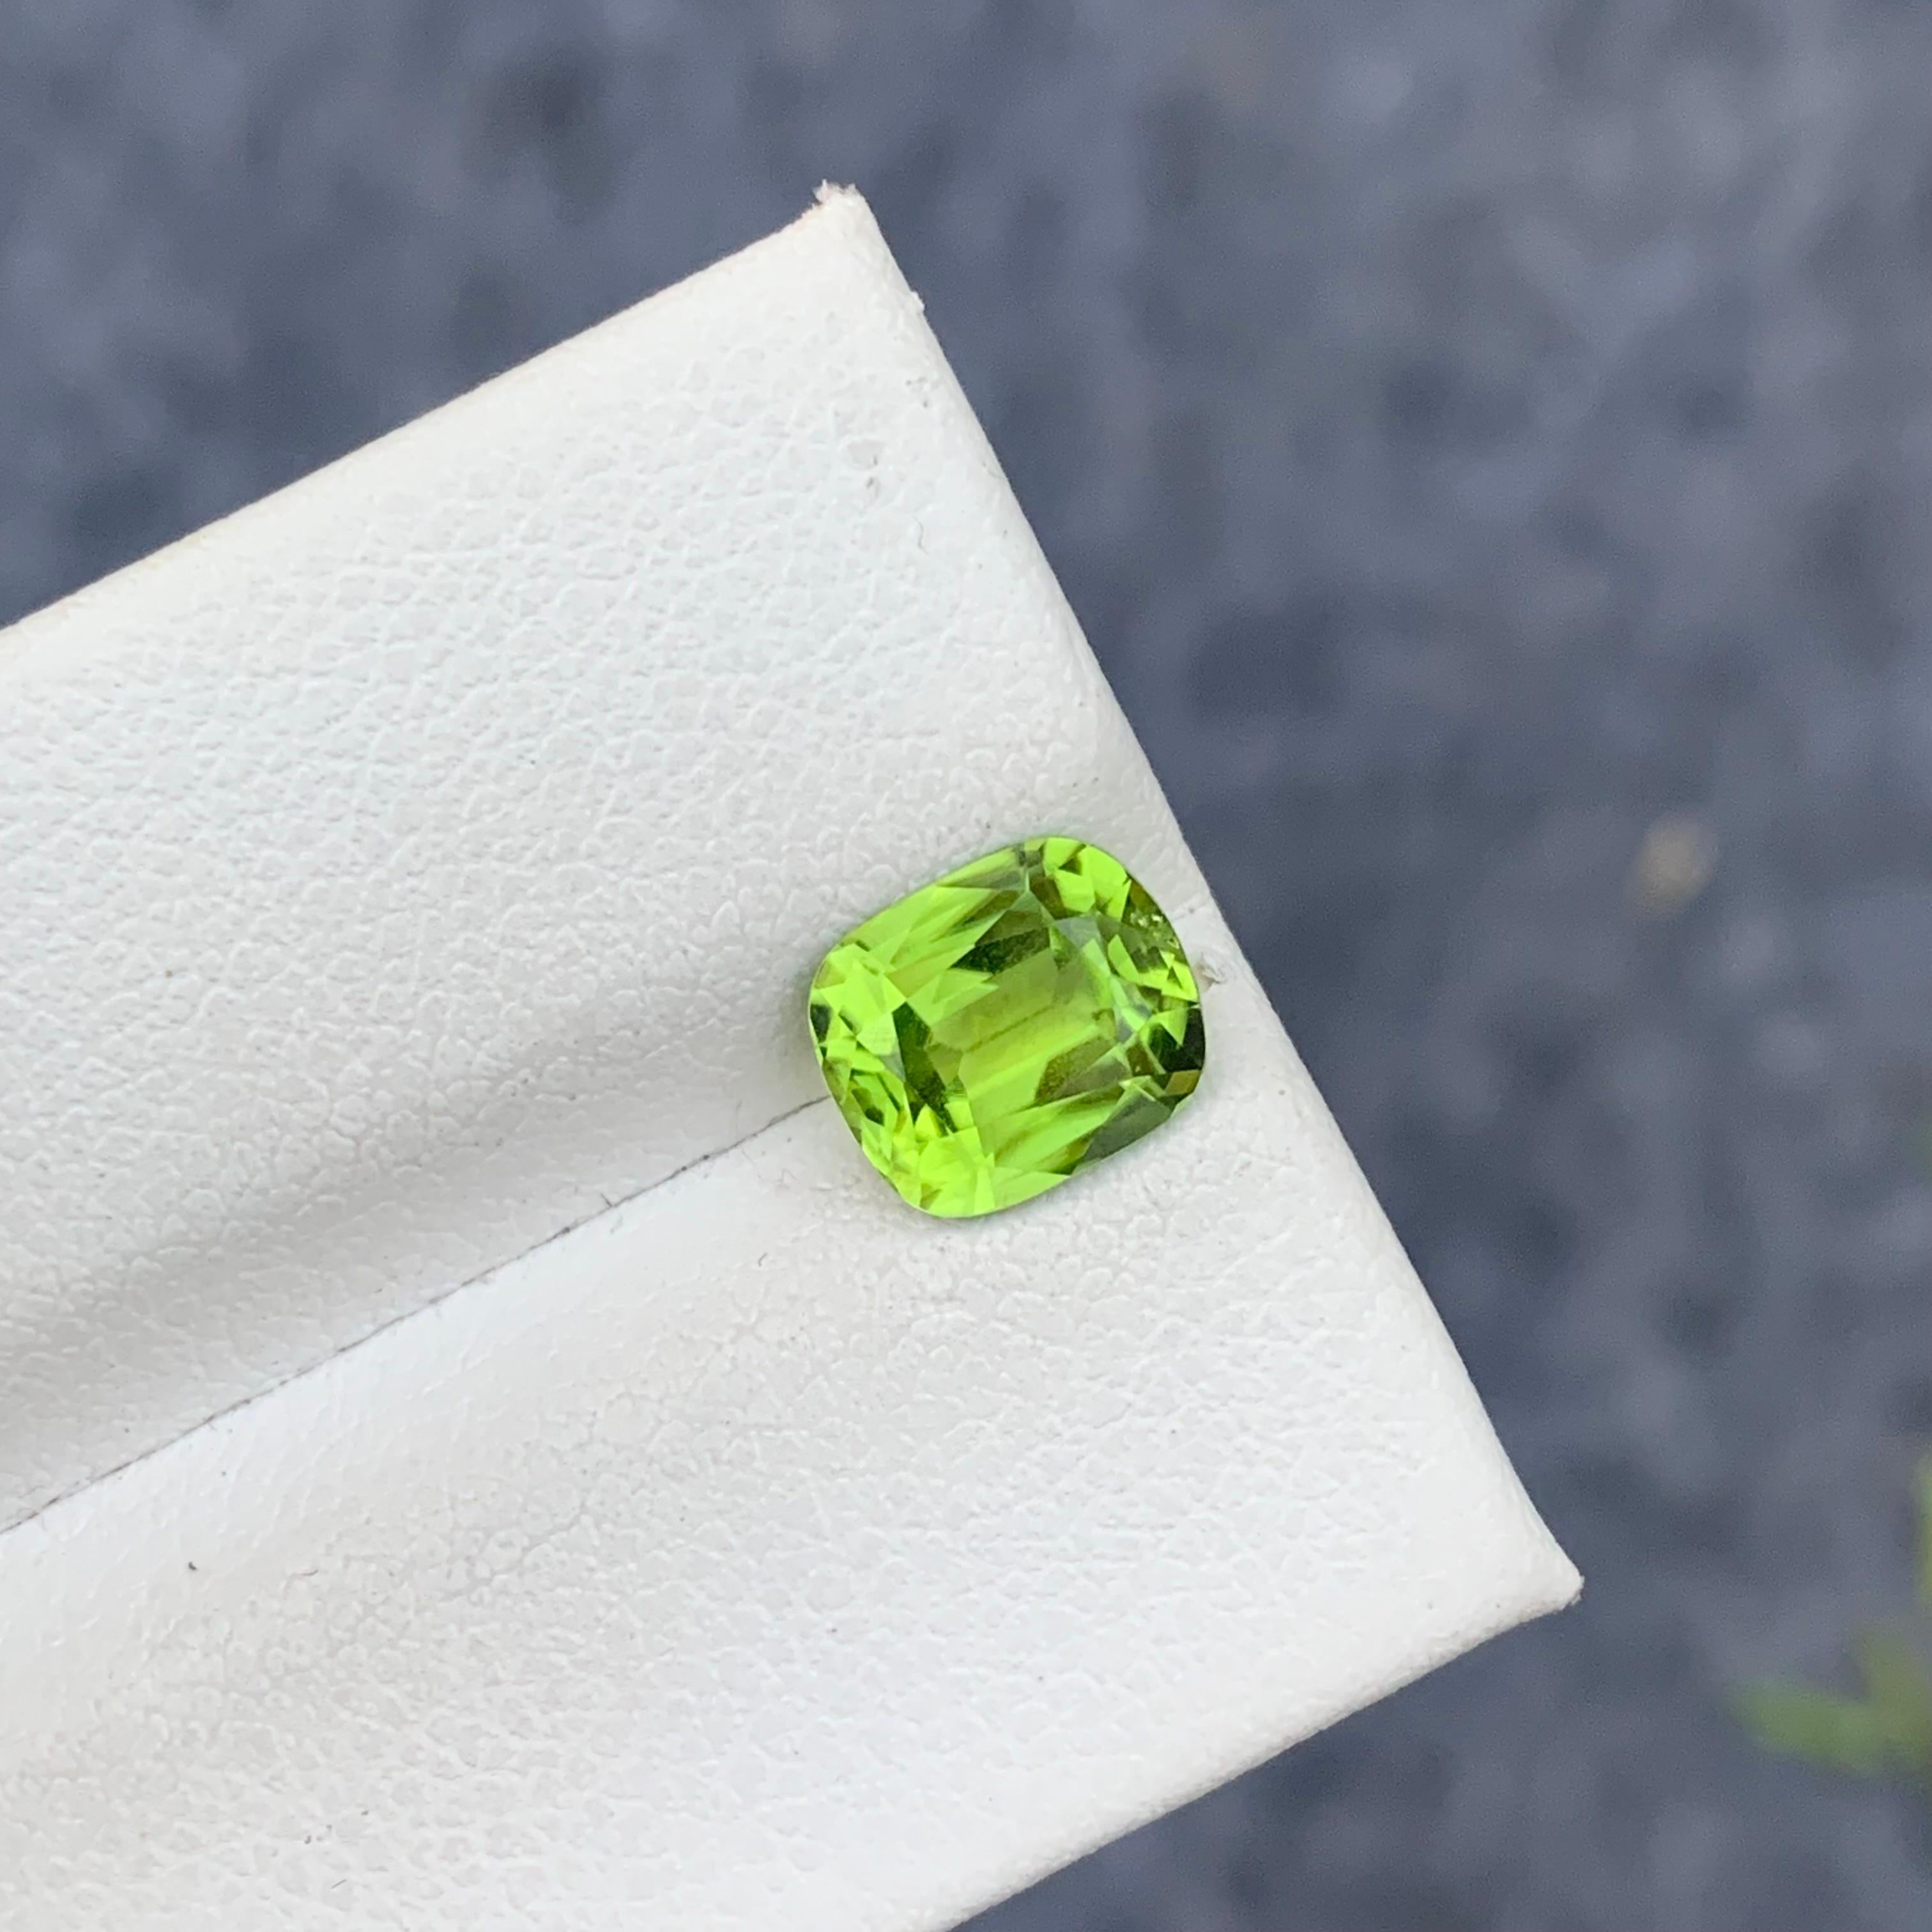 Gemstone Type : Peridot
Weight : 1.75 Carats
Dimensions : 8x6.7x4.4 Mm
Origin : Suppat Valley Pakistan
Clarity : Eye Clean
Certificate: On Demand
Color: Green
Treatment: Non
Shape: Cushion
It helps cure diseases related to lungs, breasts, intestinal